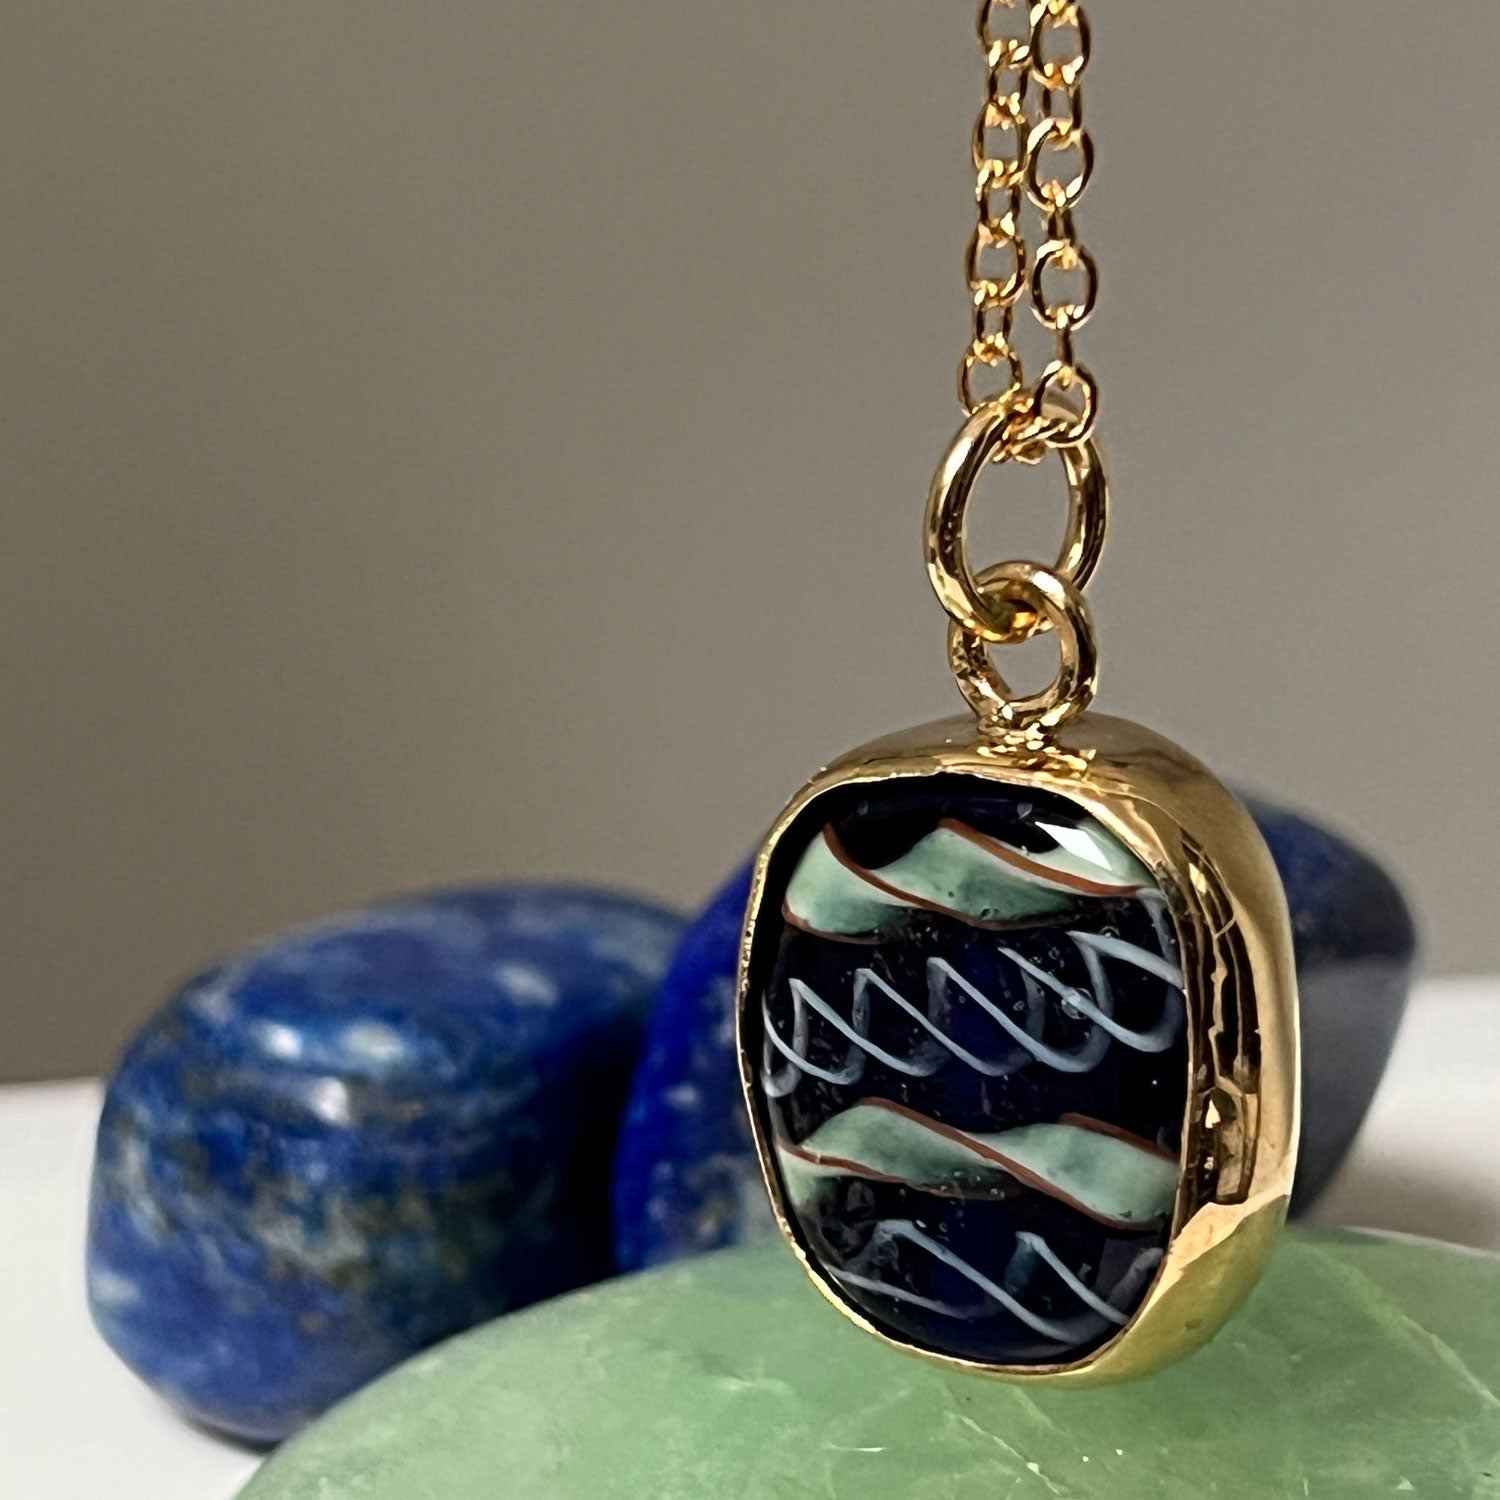 Fairtrade Bezeled Pendant Blue Glass on Simple Chain